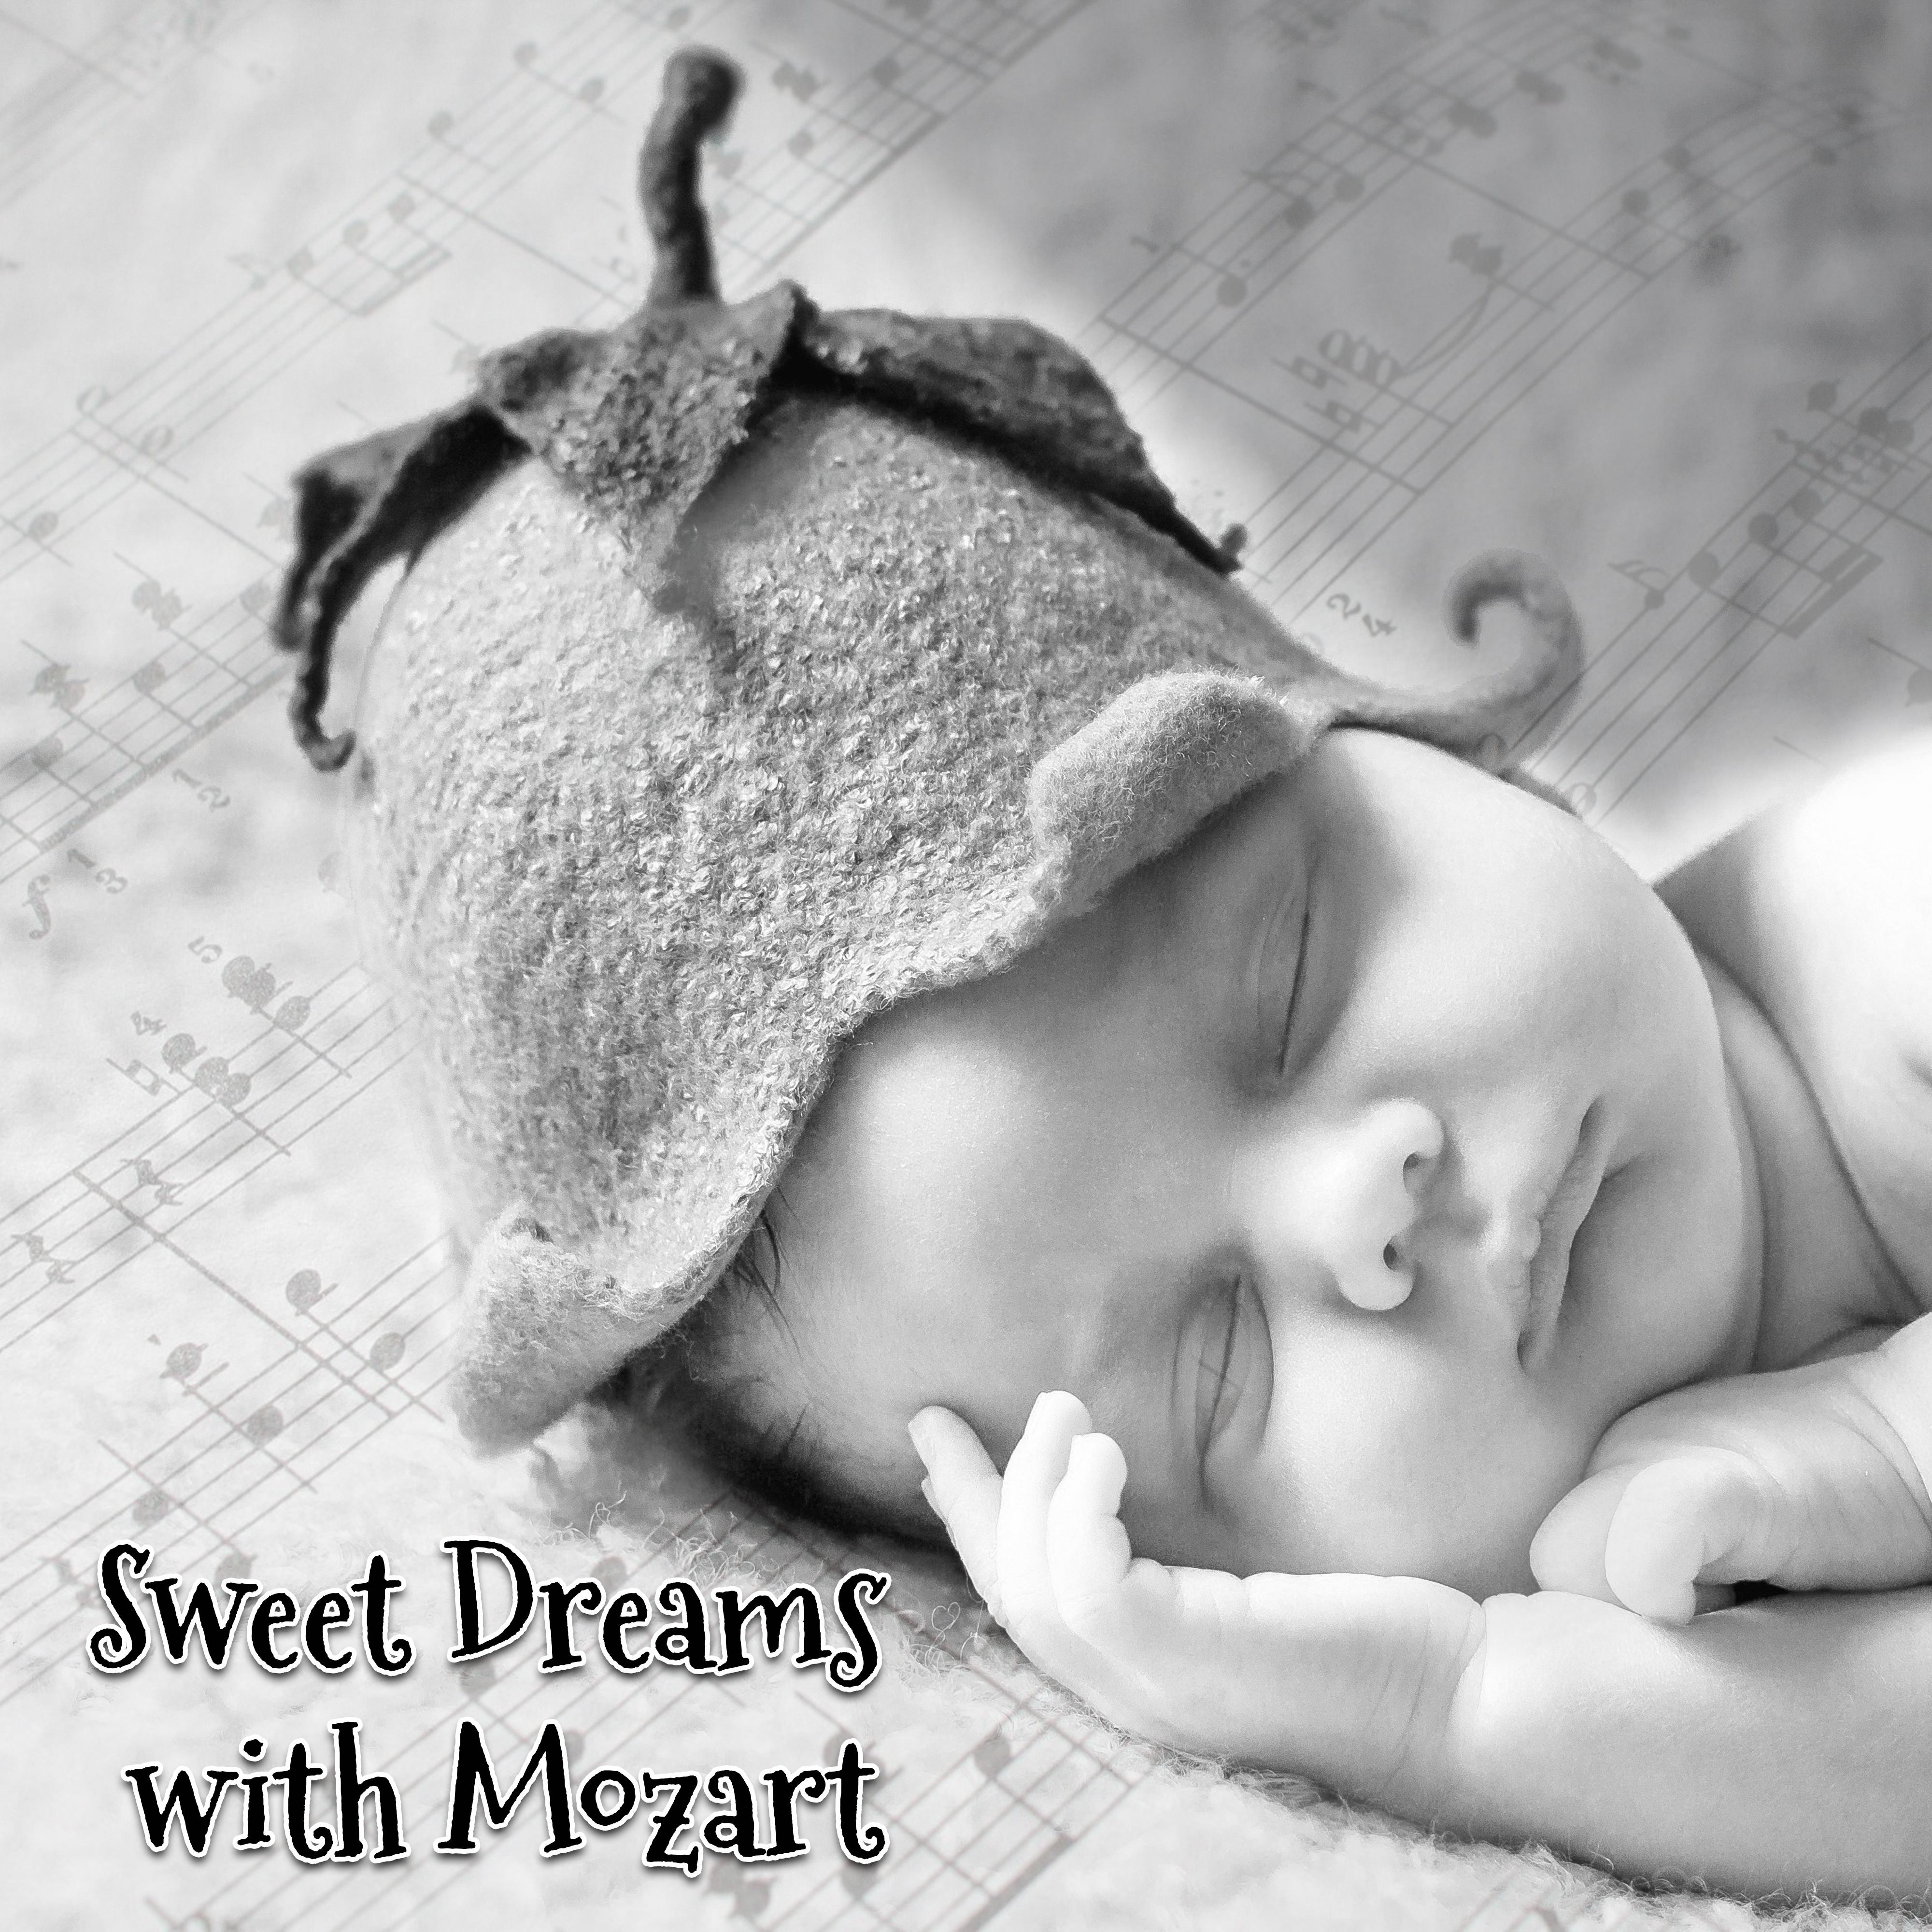 Sweet Dreams with Mozart  Baby Music, Deep Sleep, Peaceful Mind, Relaxation Lullabies to Bed, Classical Music at Goodnight